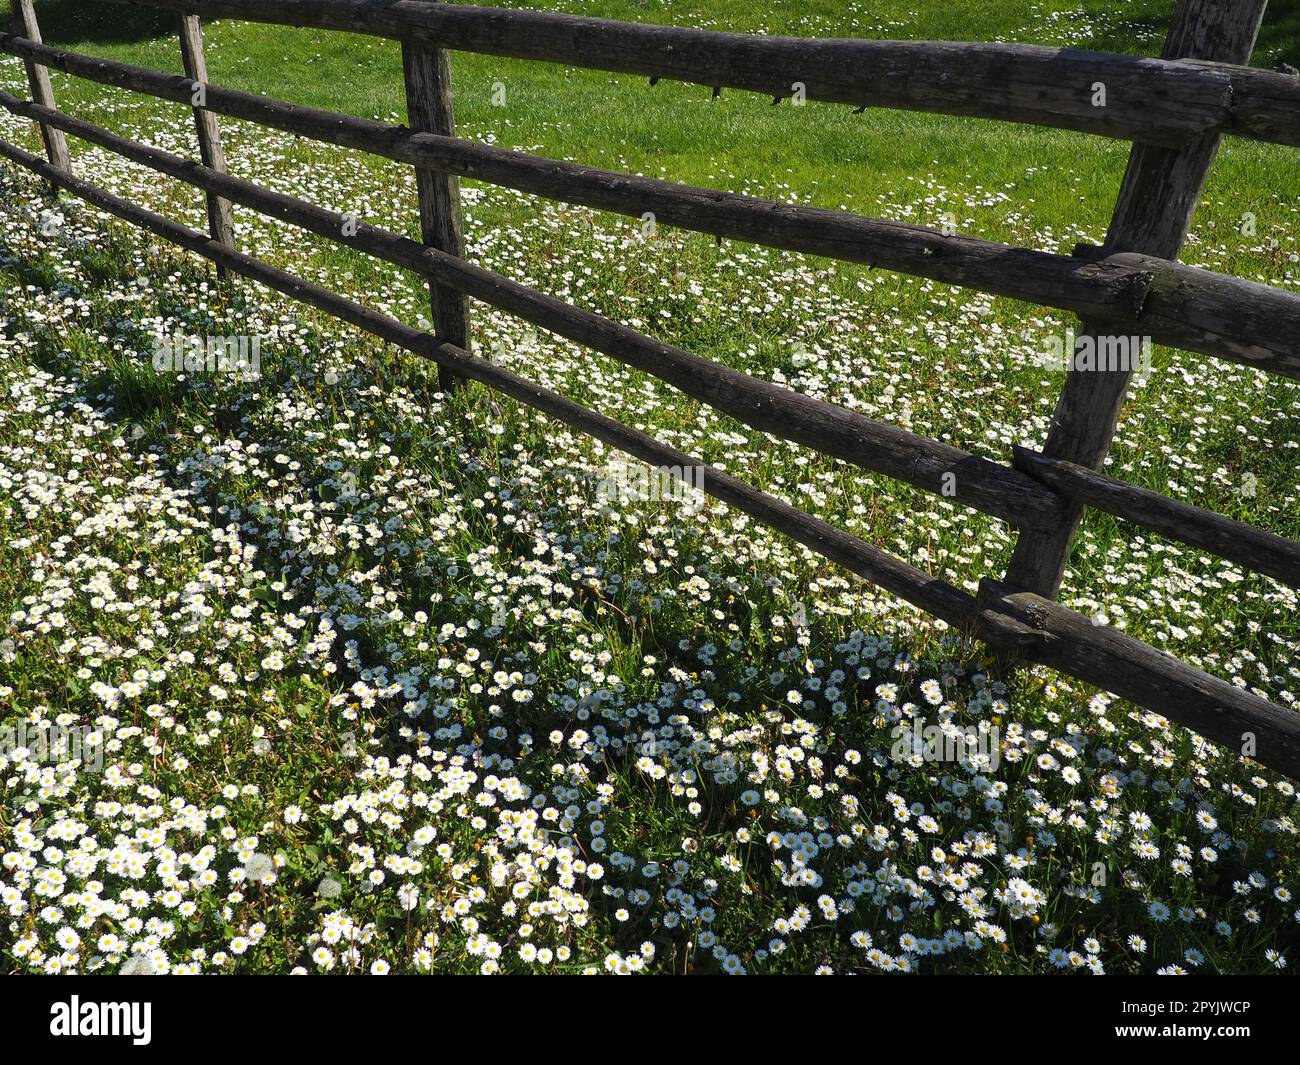 fence in the field. Wooden rustic fence in a clearing with green grass and white daisies. Peasant village life. A lawn with meadow grasses. Stock Photo